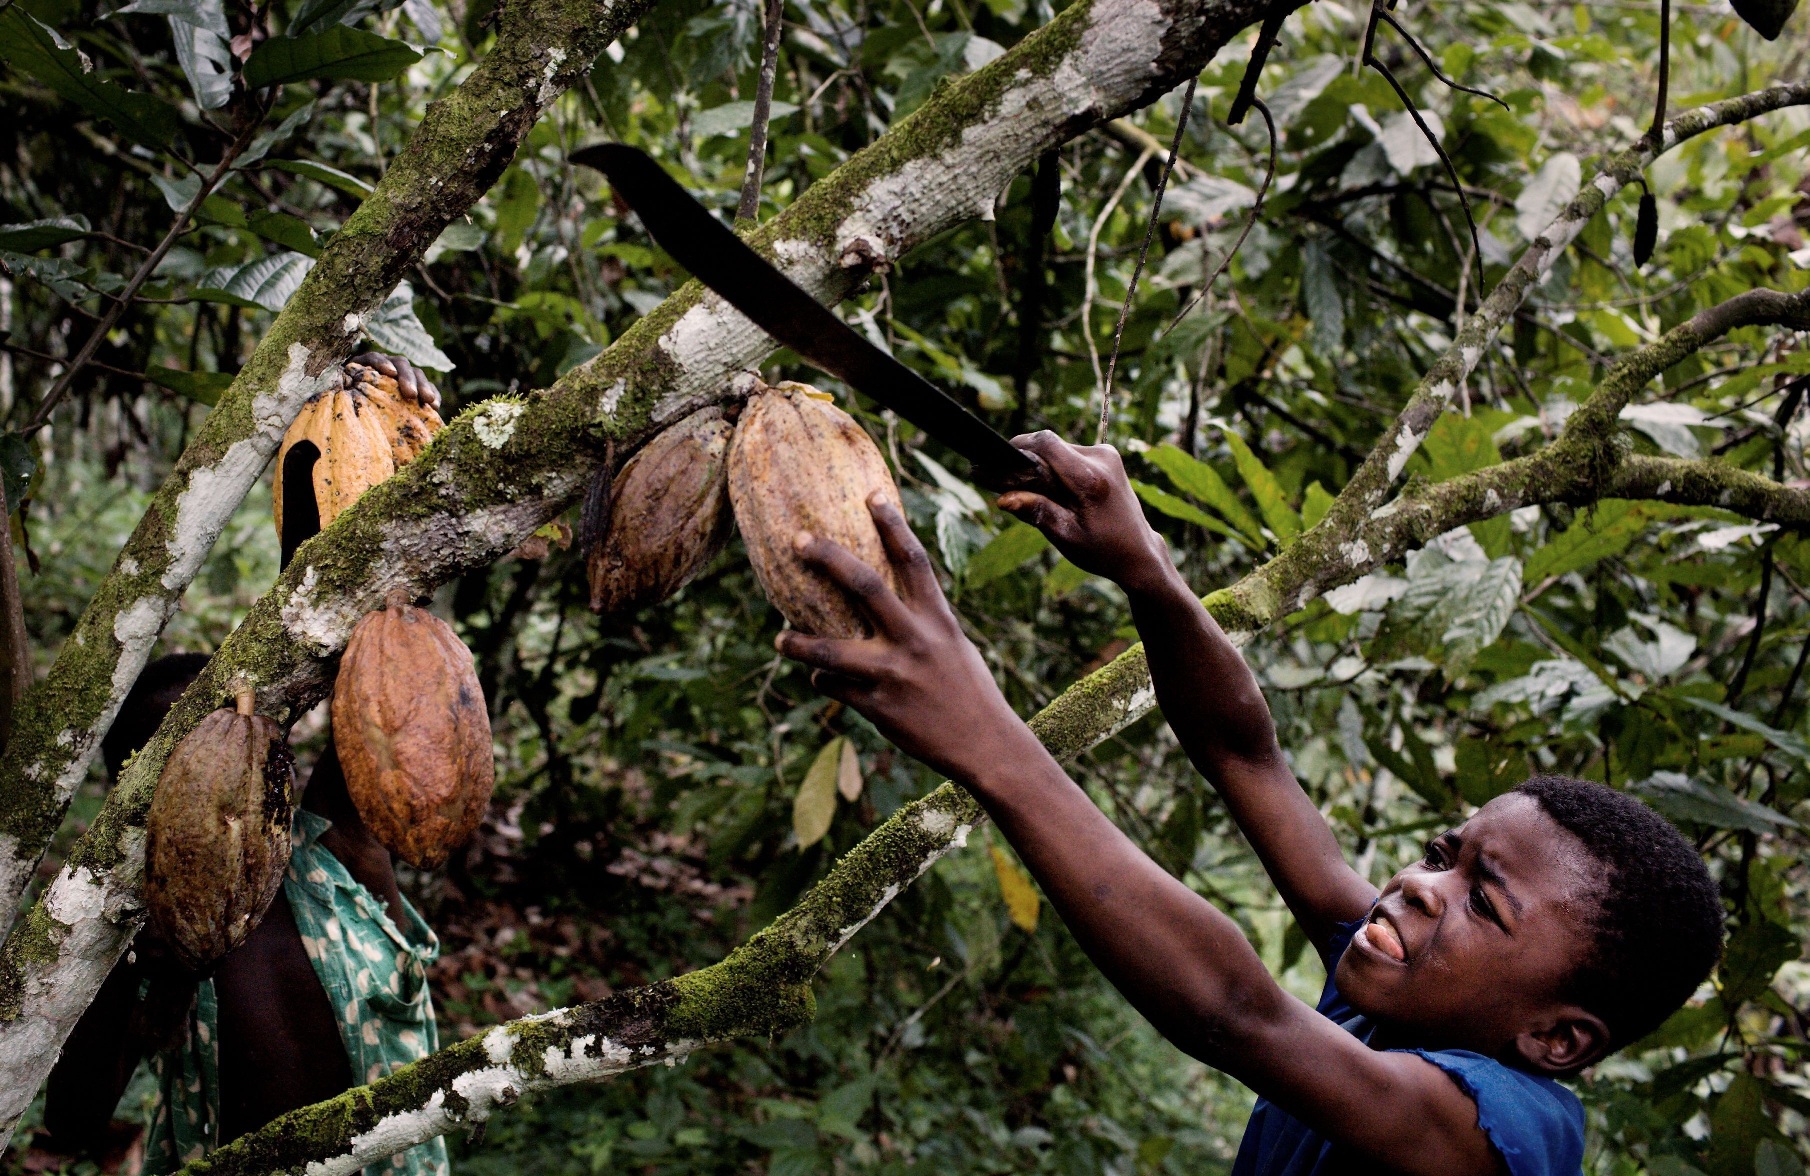 child labor and slavery in the chocolate industry case study